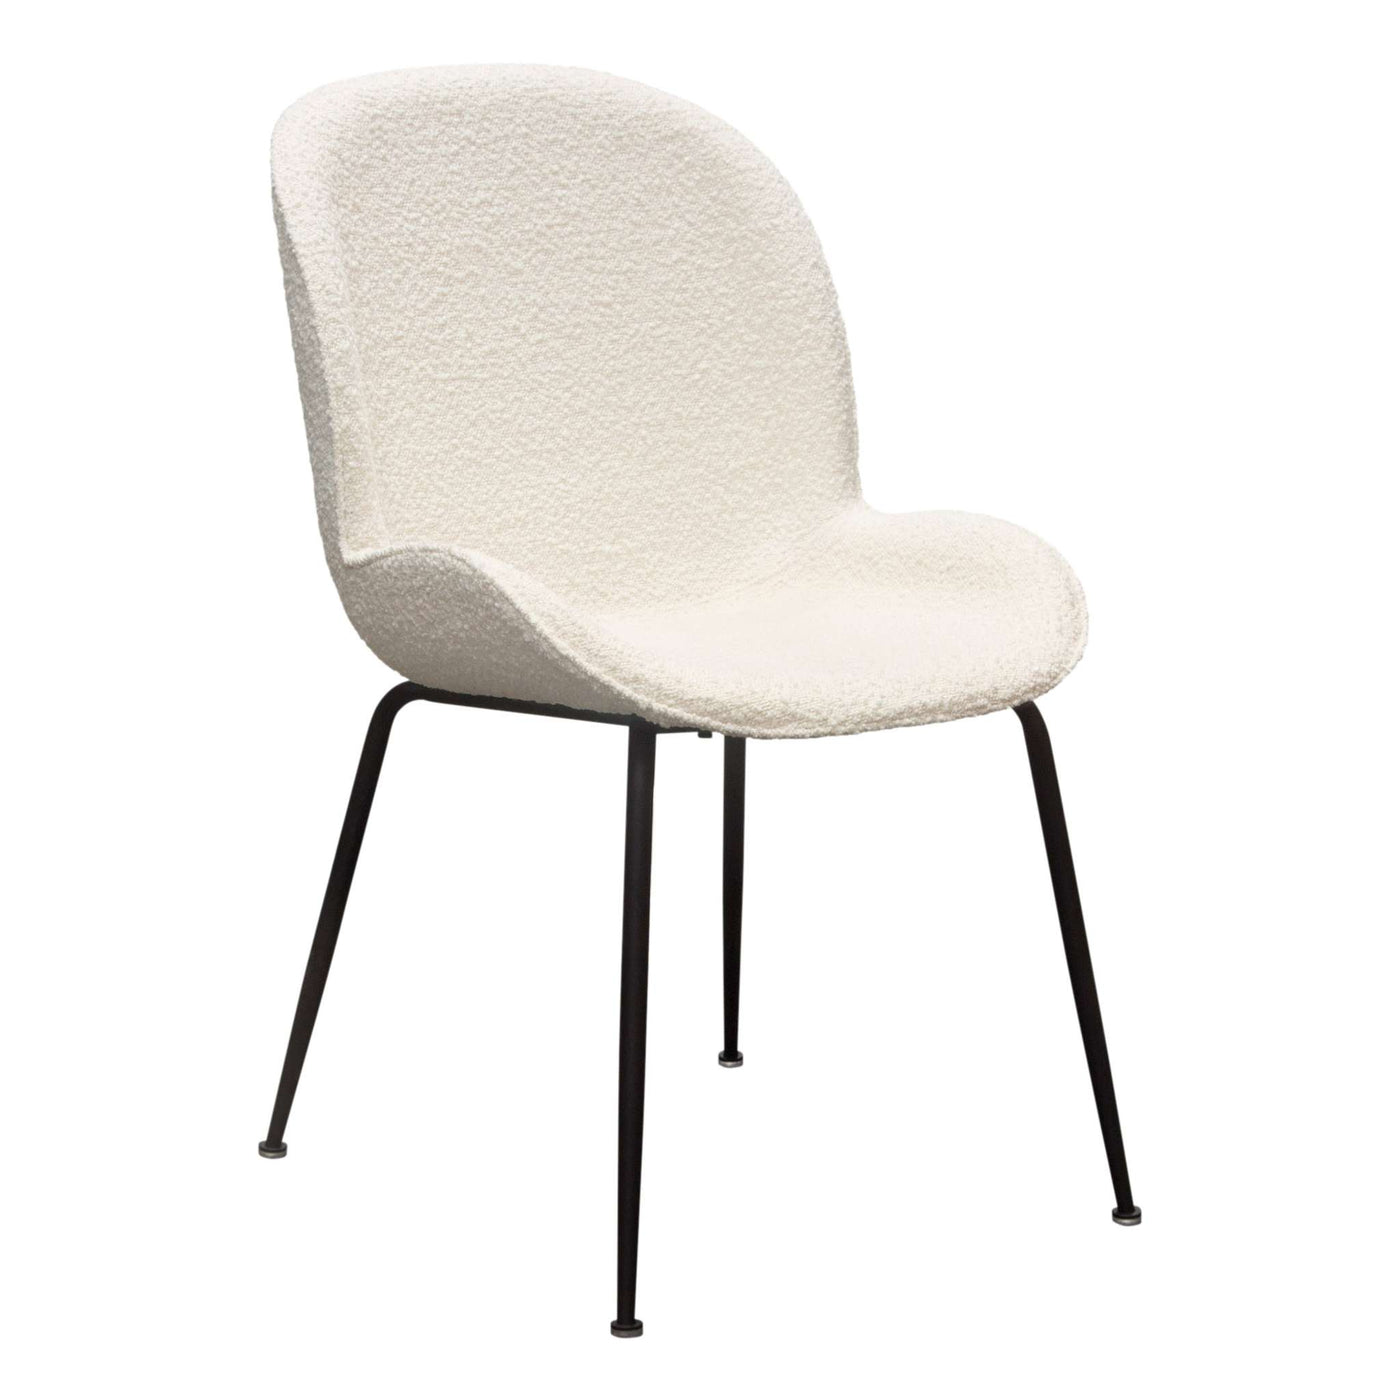 Session 2-Pack Dining Chair in Ivory Boucle w/ Black Powder Coat Metal Leg by Diamond Sofa